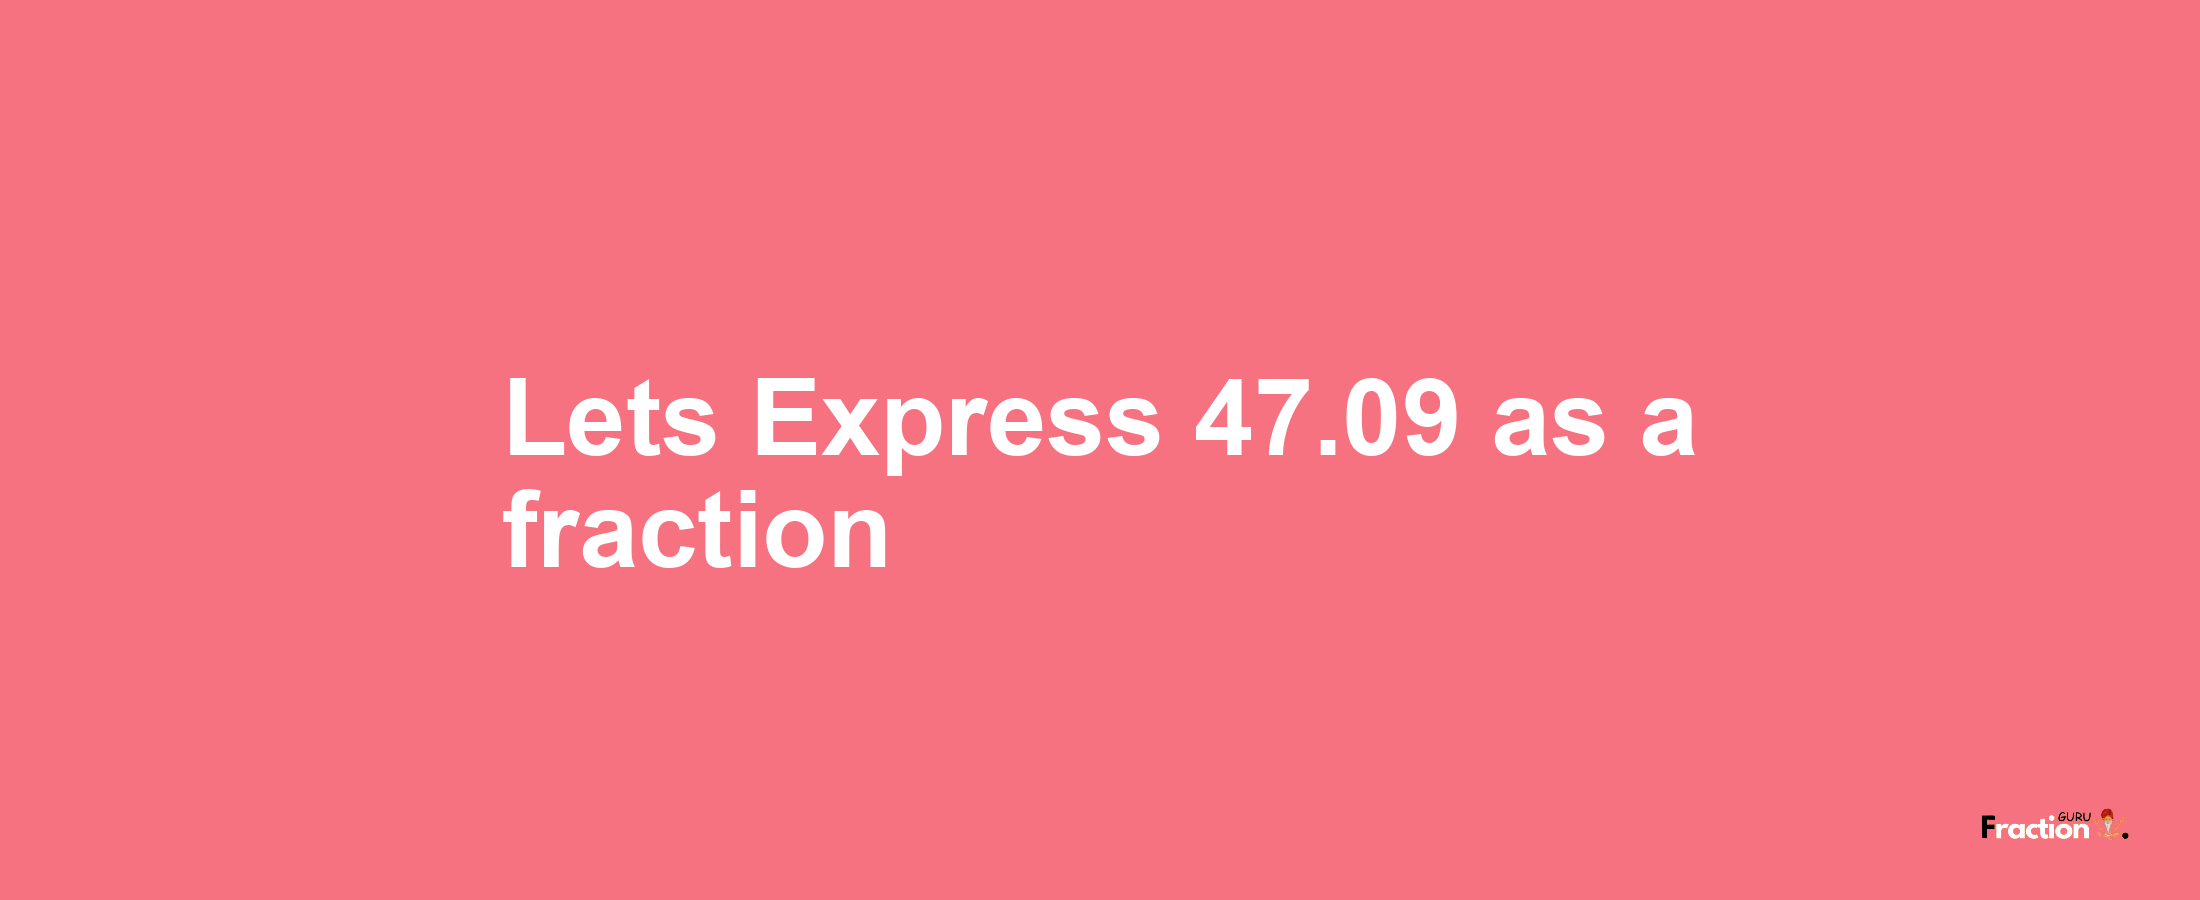 Lets Express 47.09 as afraction